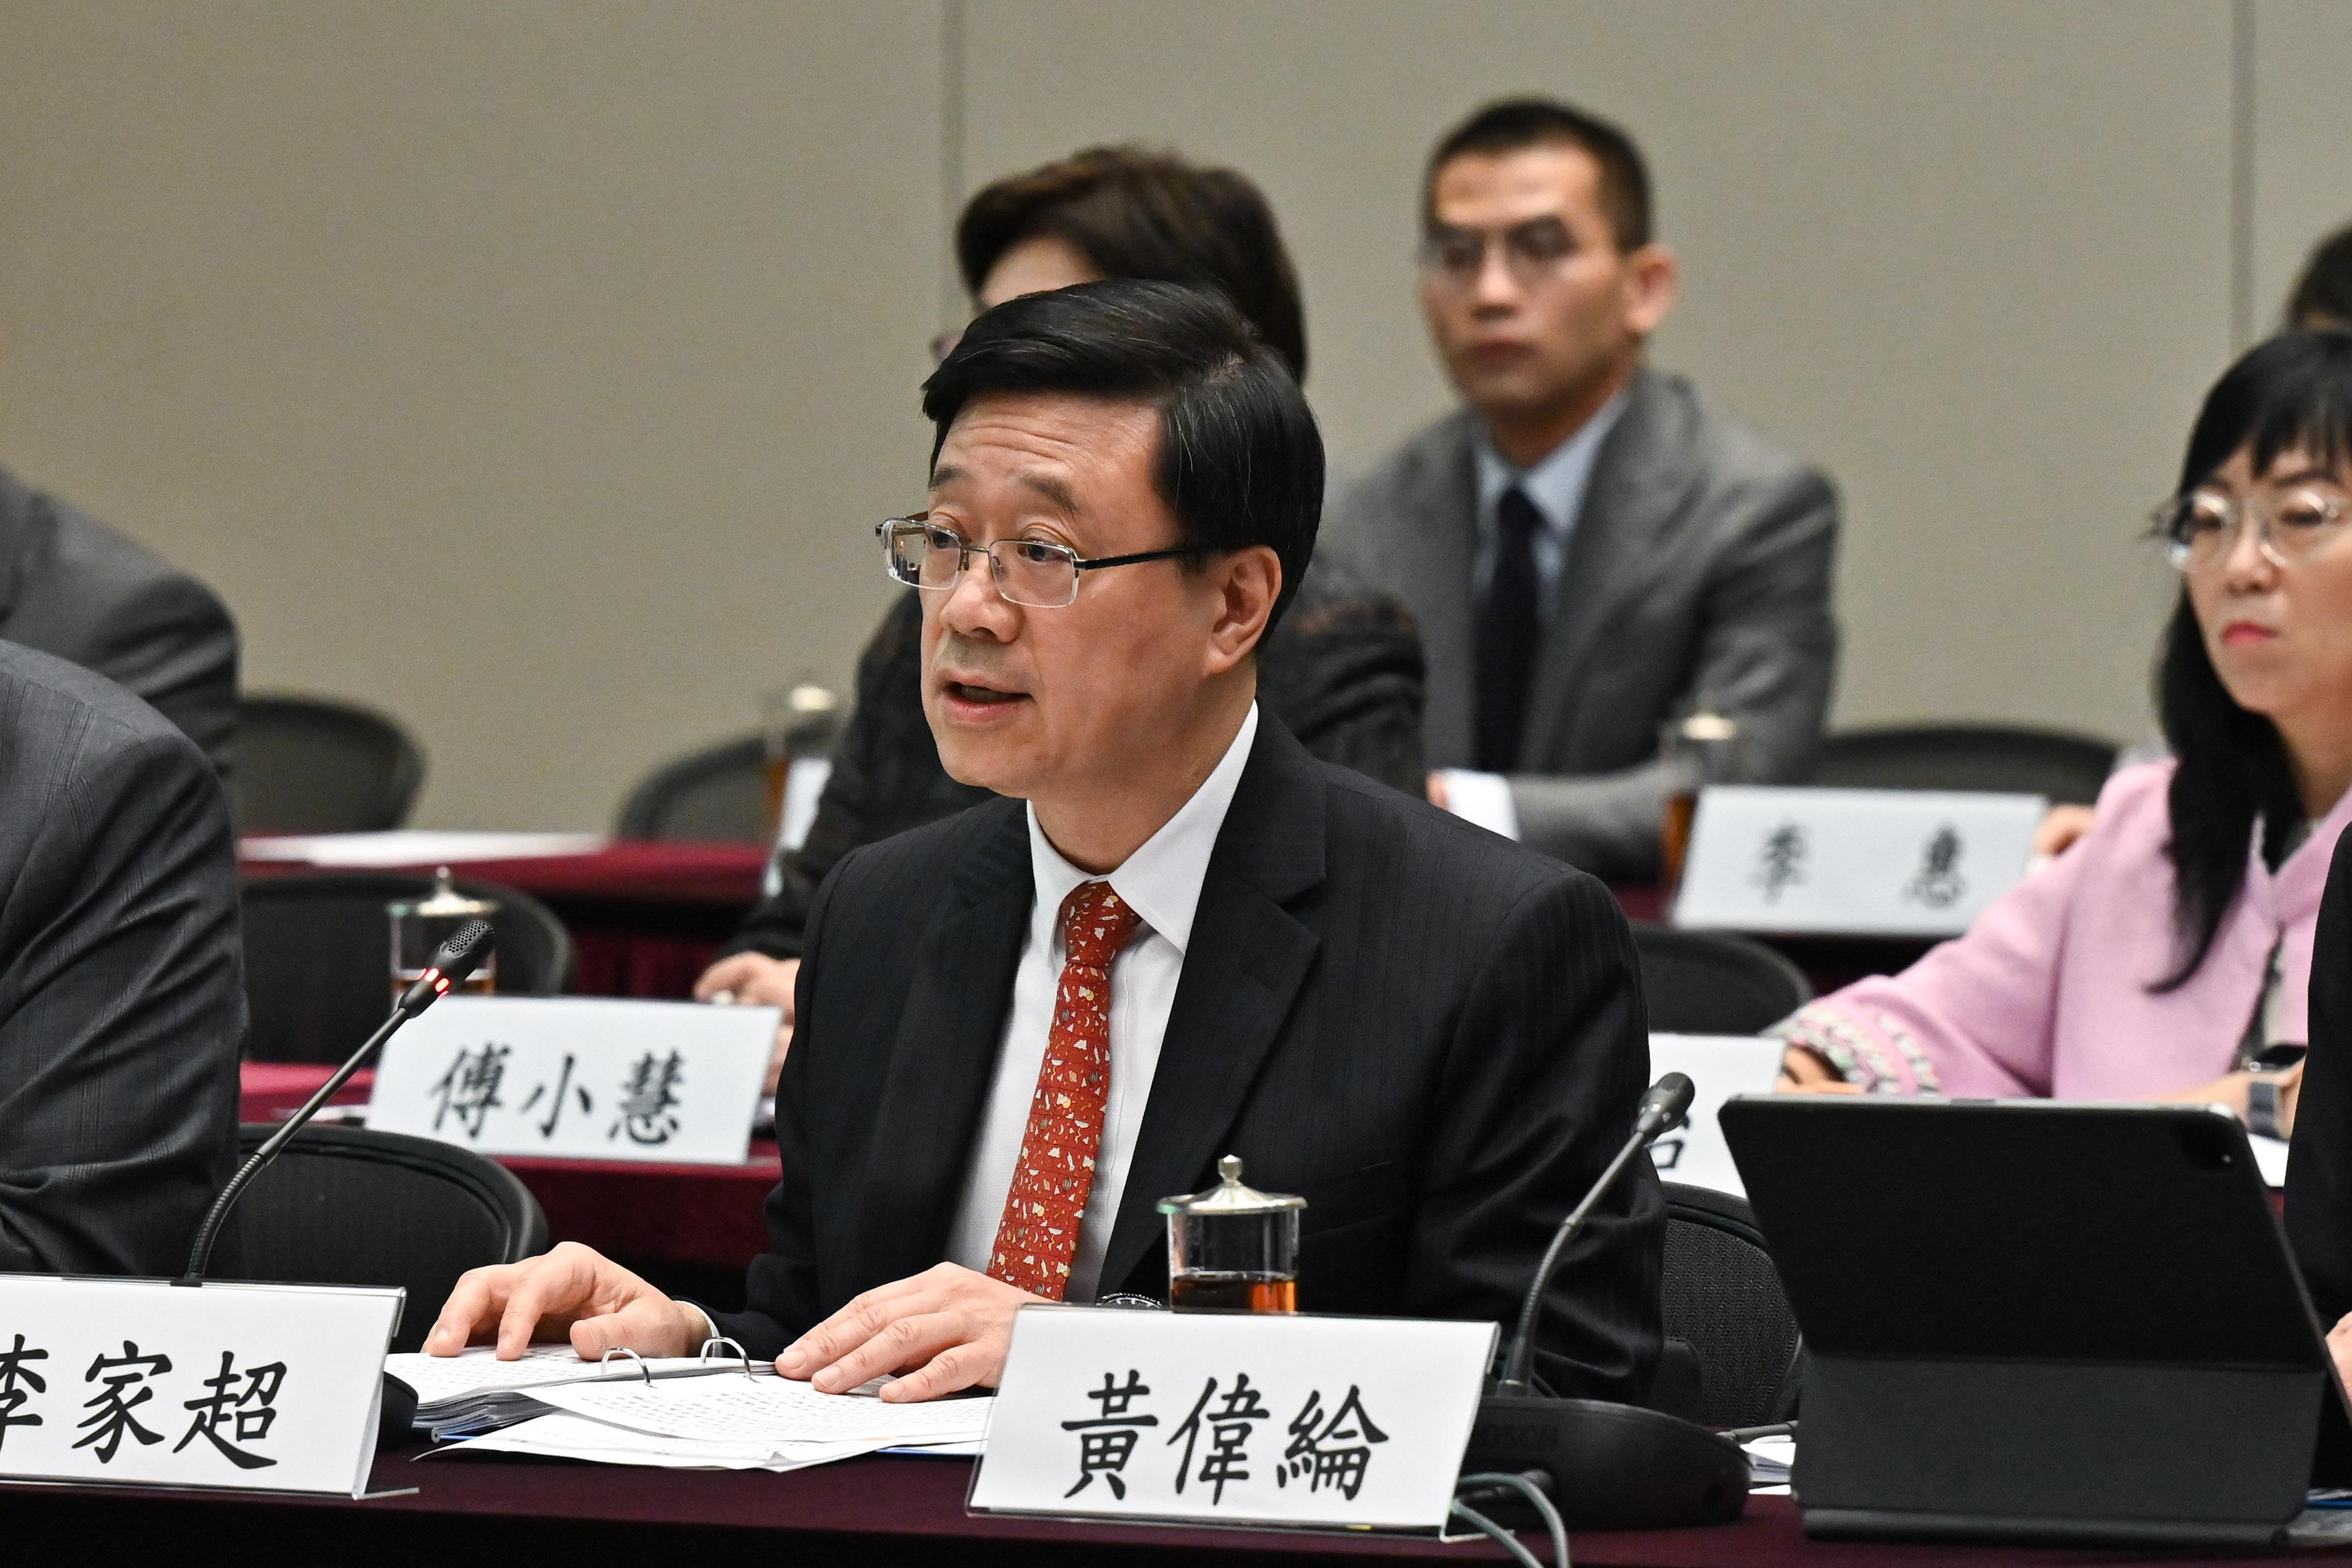 The Chief Executive, Mr John Lee, led the Hong Kong Special Administrative Region Government delegation to attend the 23rd Plenary of the Hong Kong/Guangdong Co-operation Joint Conference in the Central Government Offices today (March 21). Photo shows Mr Lee delivering the opening remarks at the Plenary.